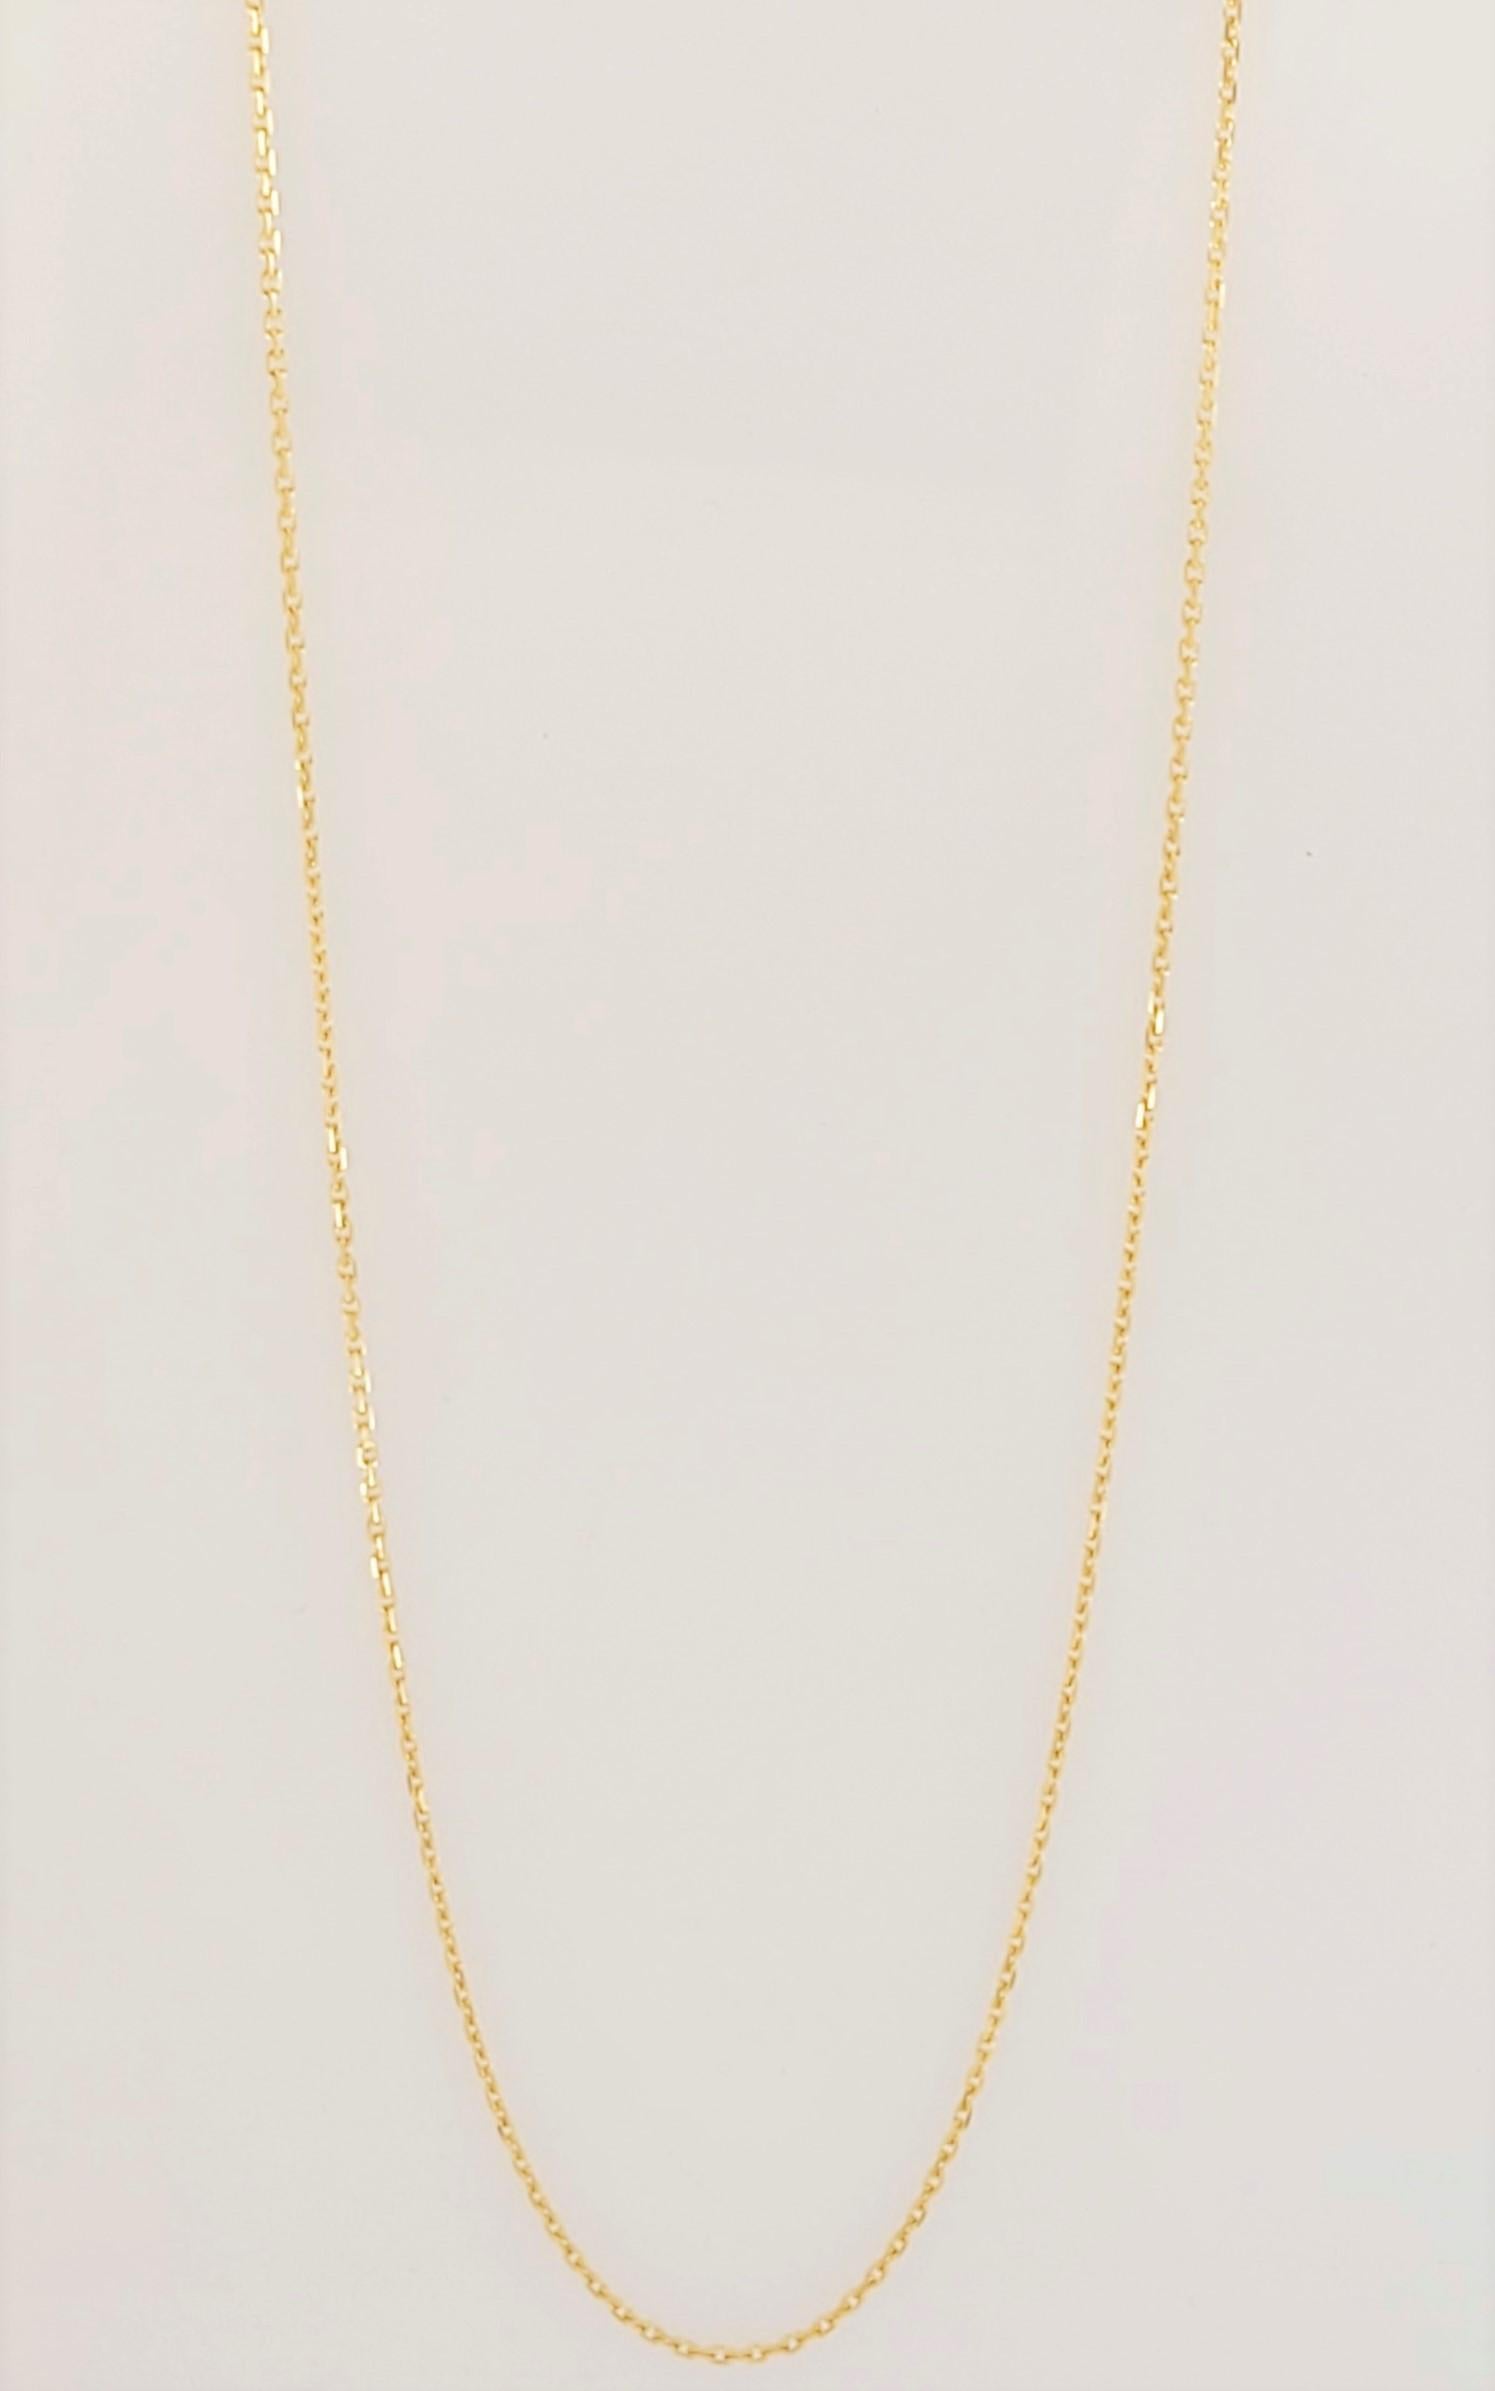 Brand Tiffany & co
18K Yellow Gold
Gender women
Condition never worn
Chain length 20